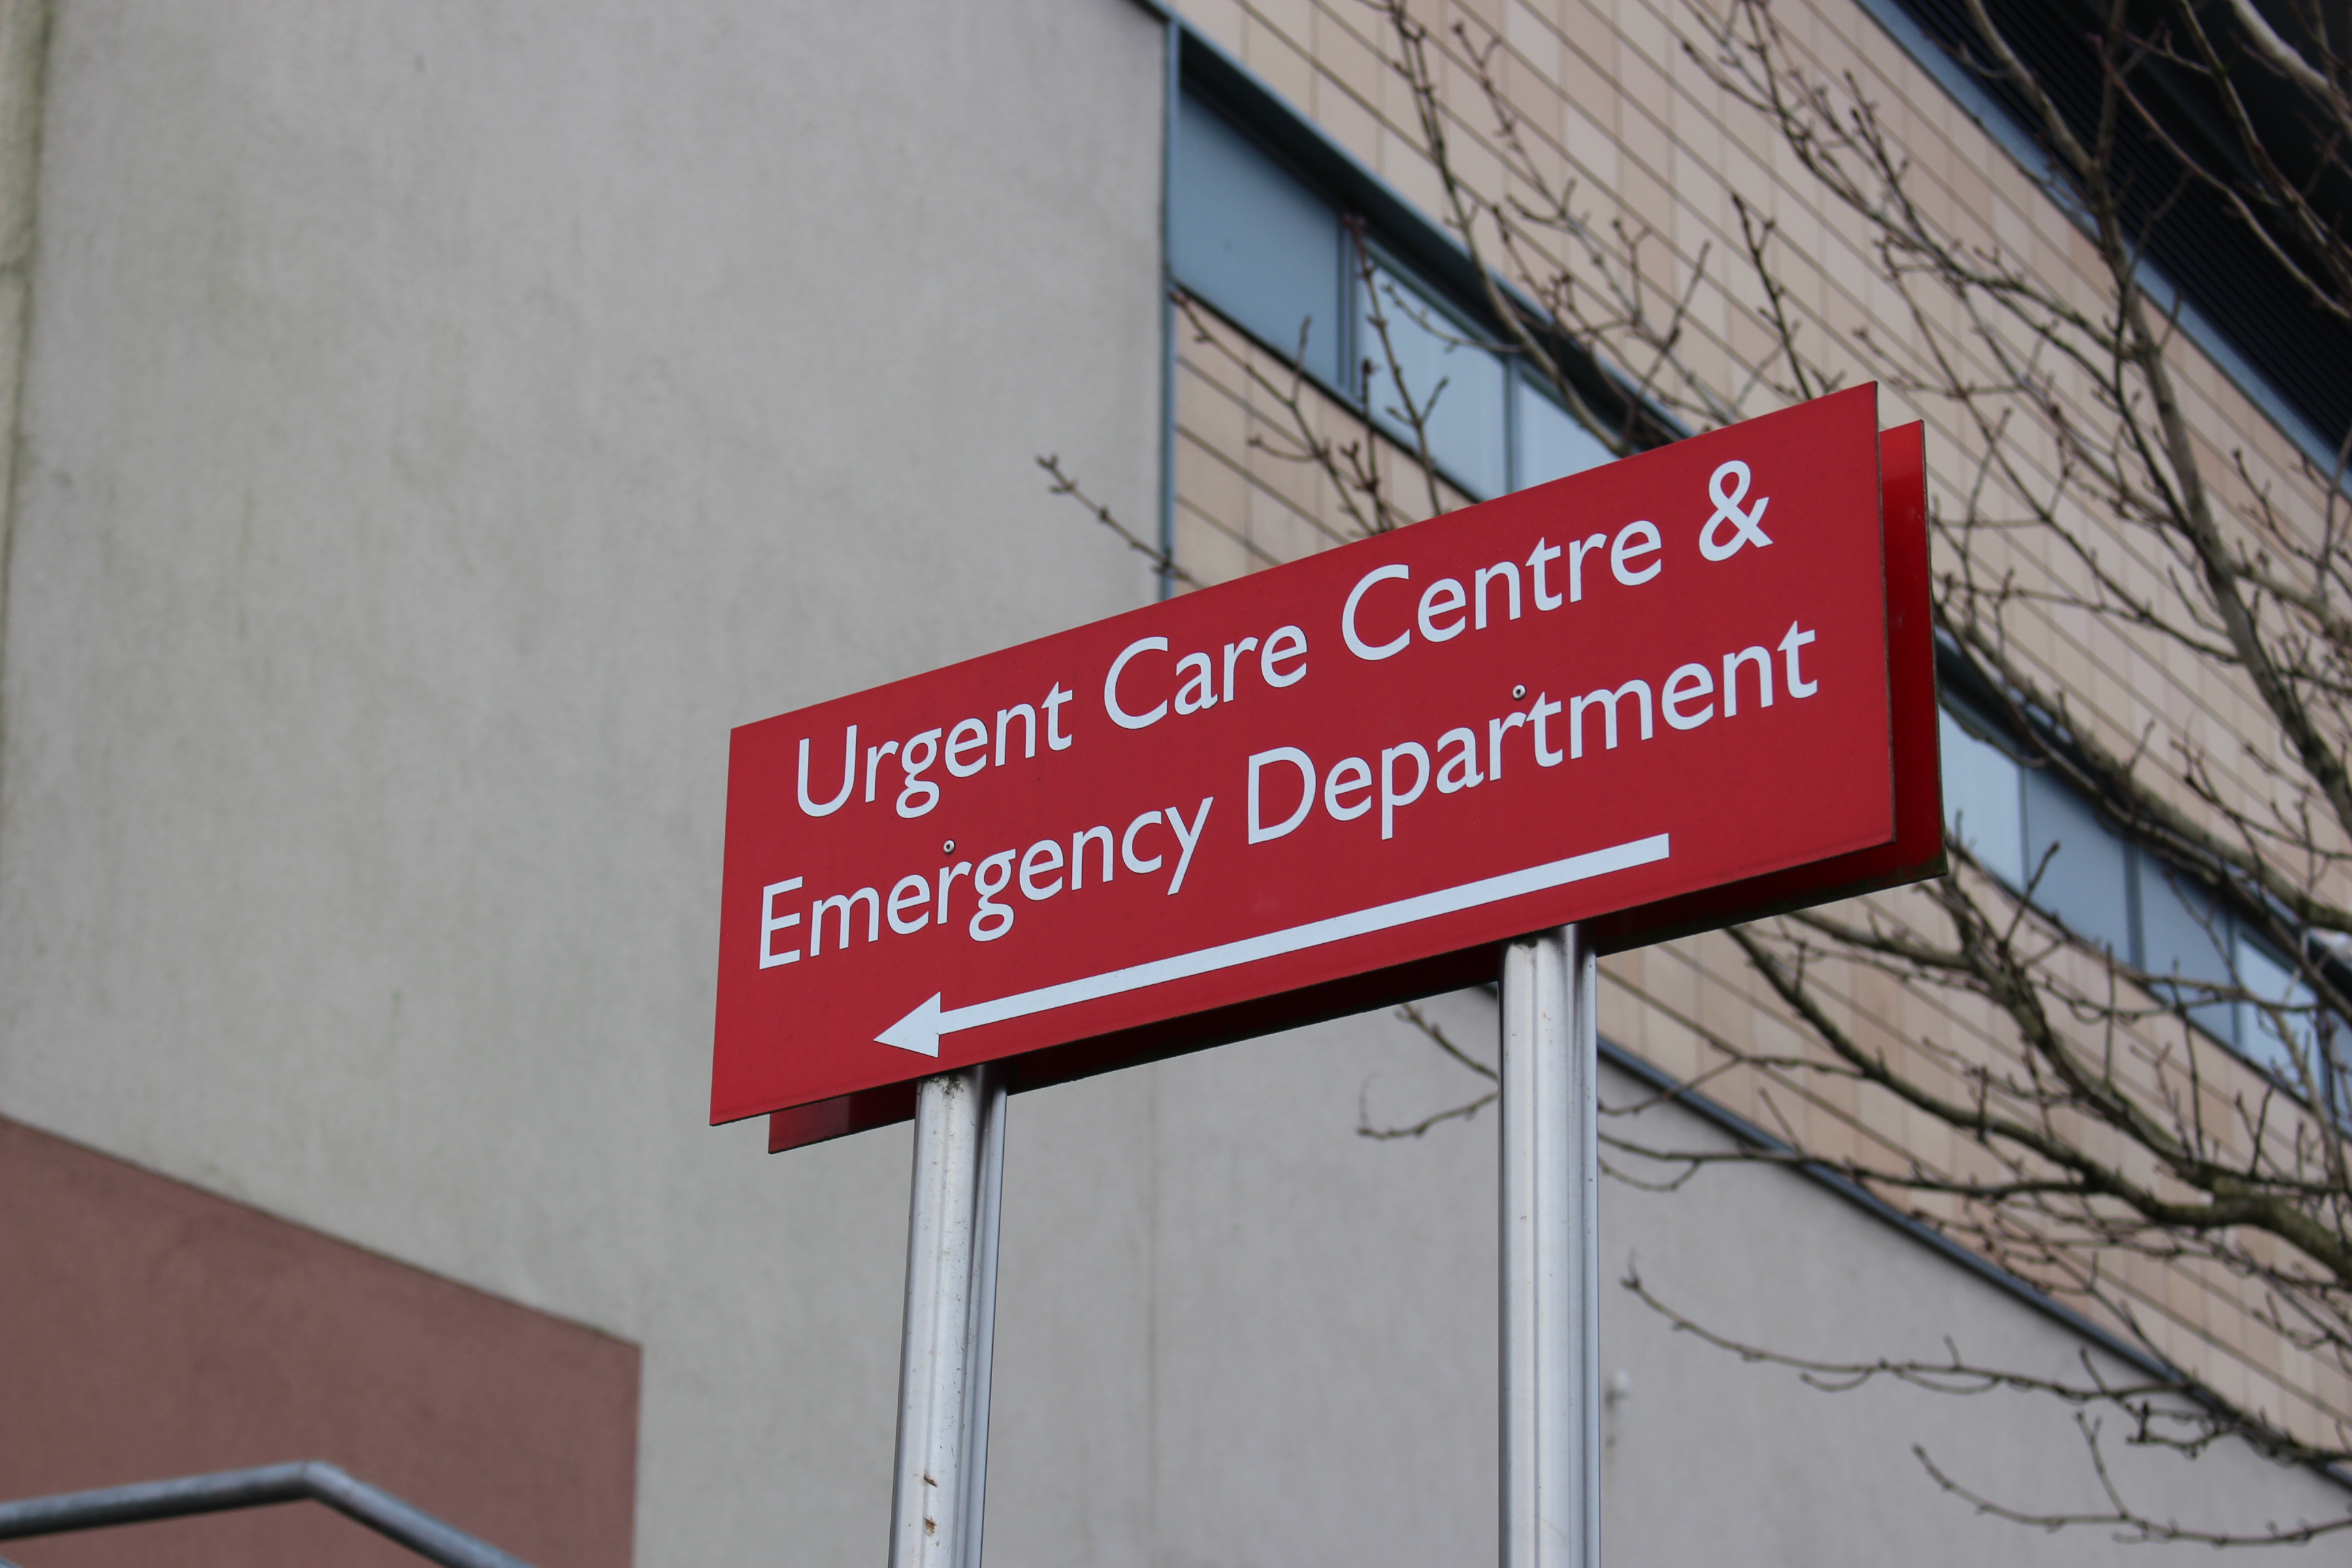 Urgent Care and Emergency Department  (5).JPG